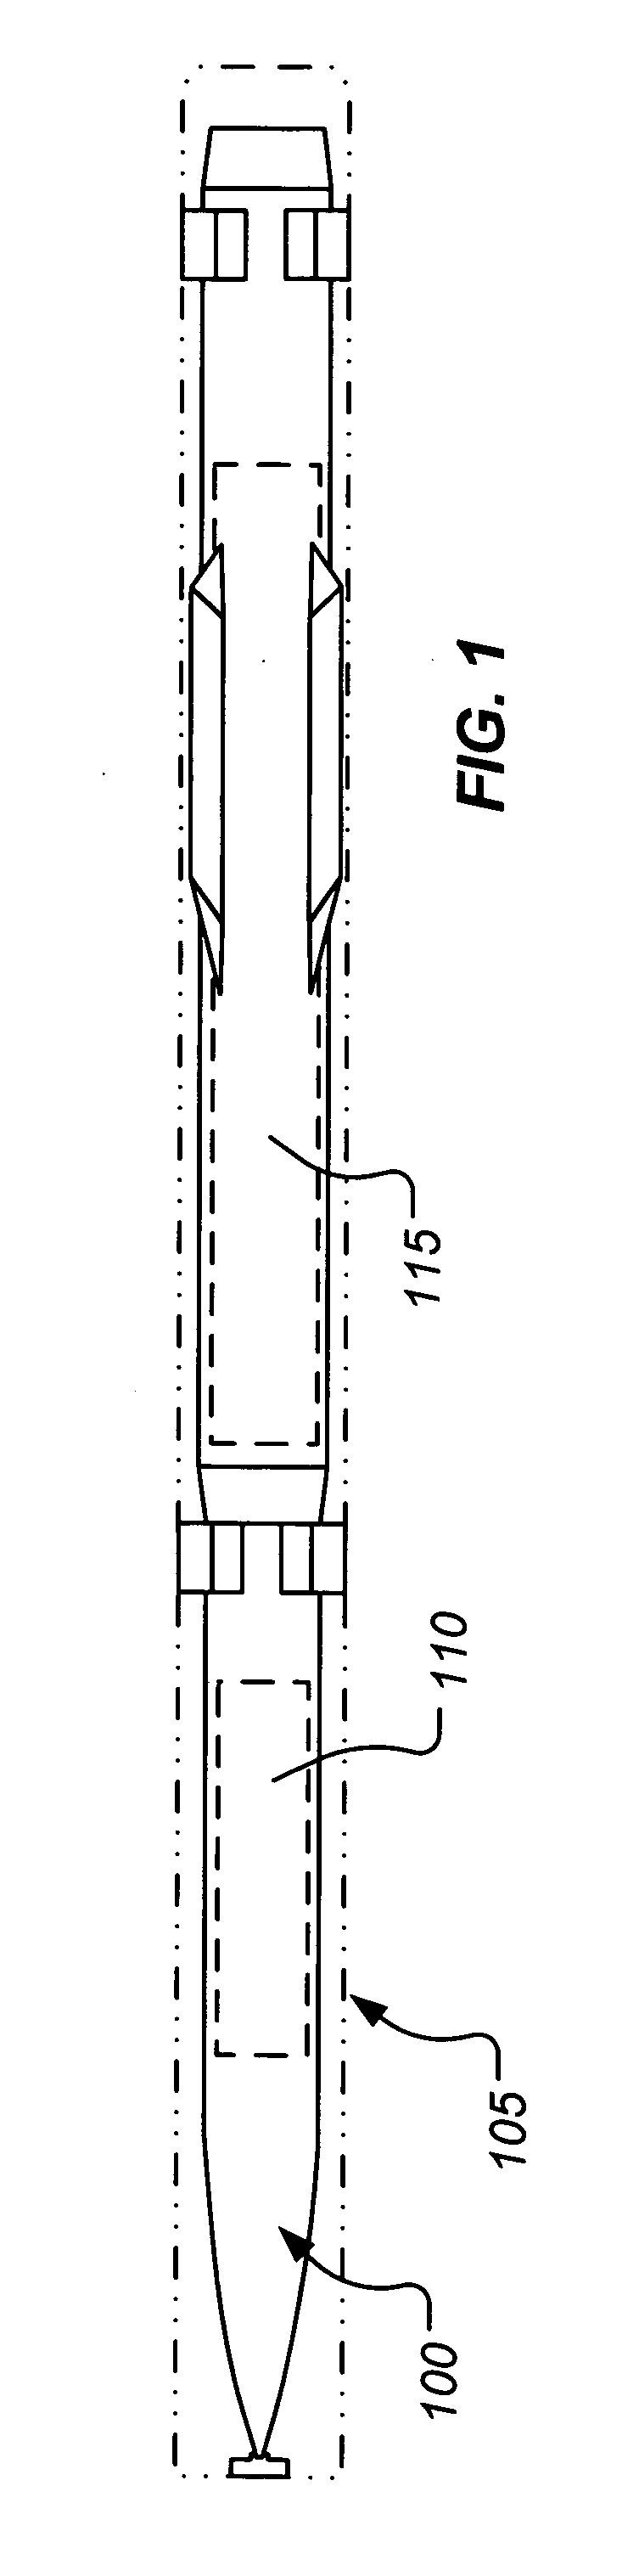 Thermally initiated venting system and method of using same